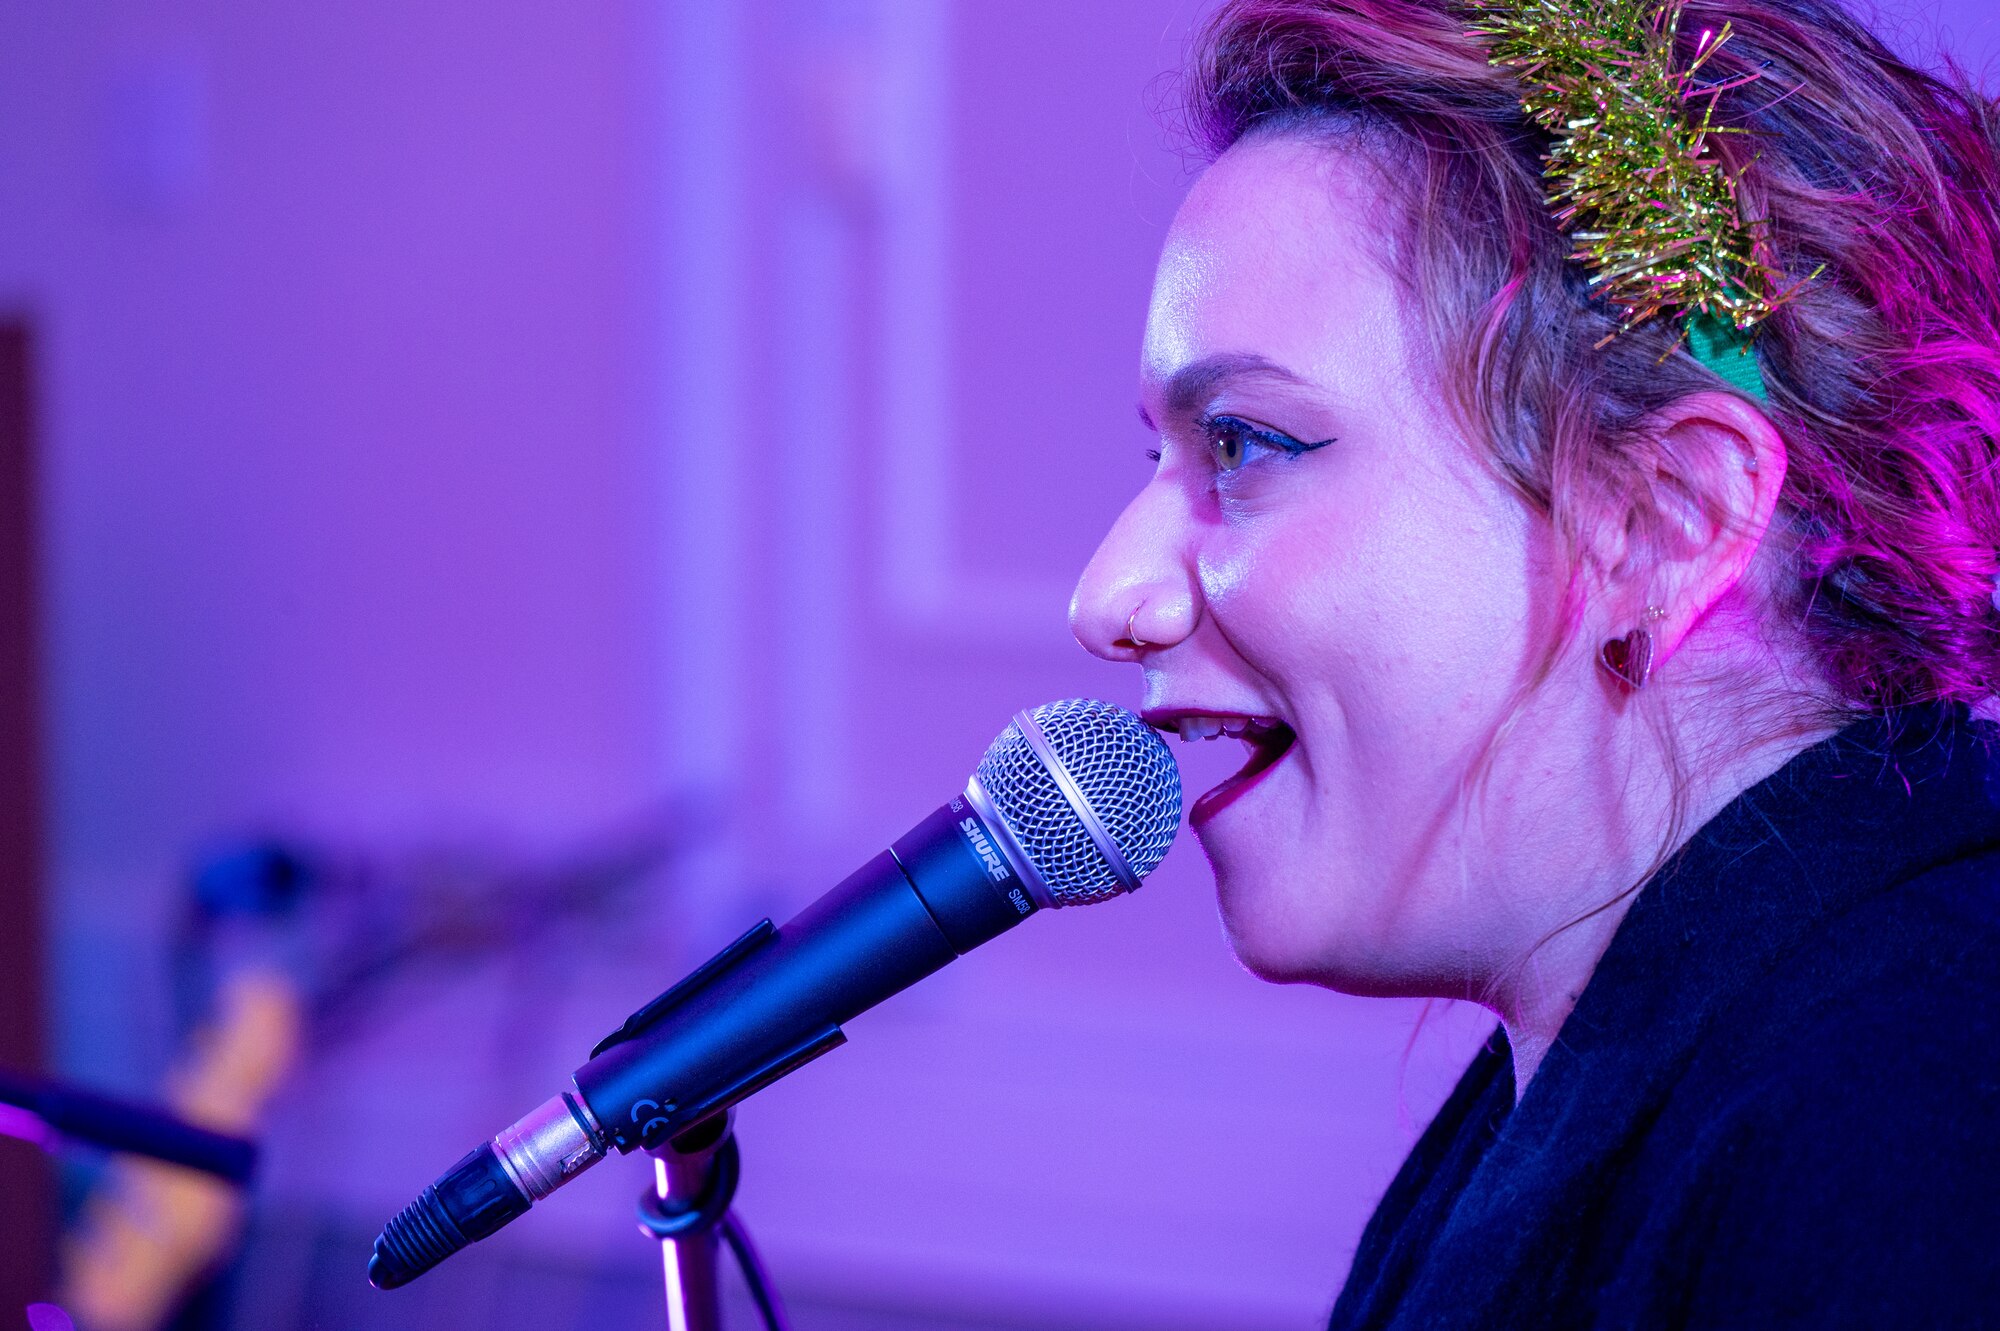 A performer sings into a microphone.